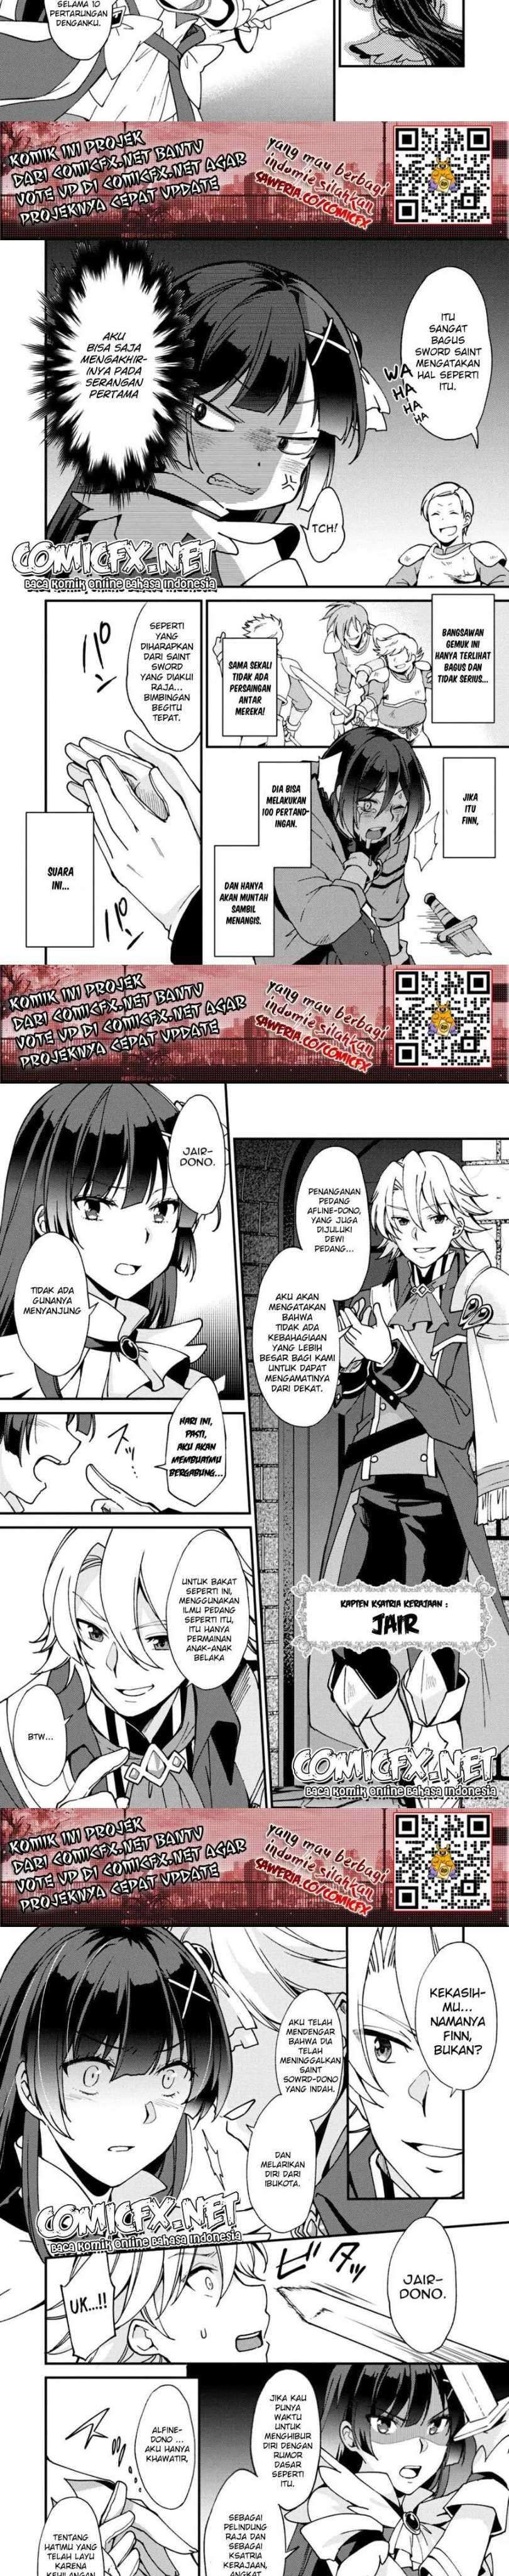 A Sword Master Childhood Friend Power Harassed Me Harshly, So I Broke off Our Relationship and Make a Fresh Start at the Frontier as a Magic Swordsman Chapter 05.2 2